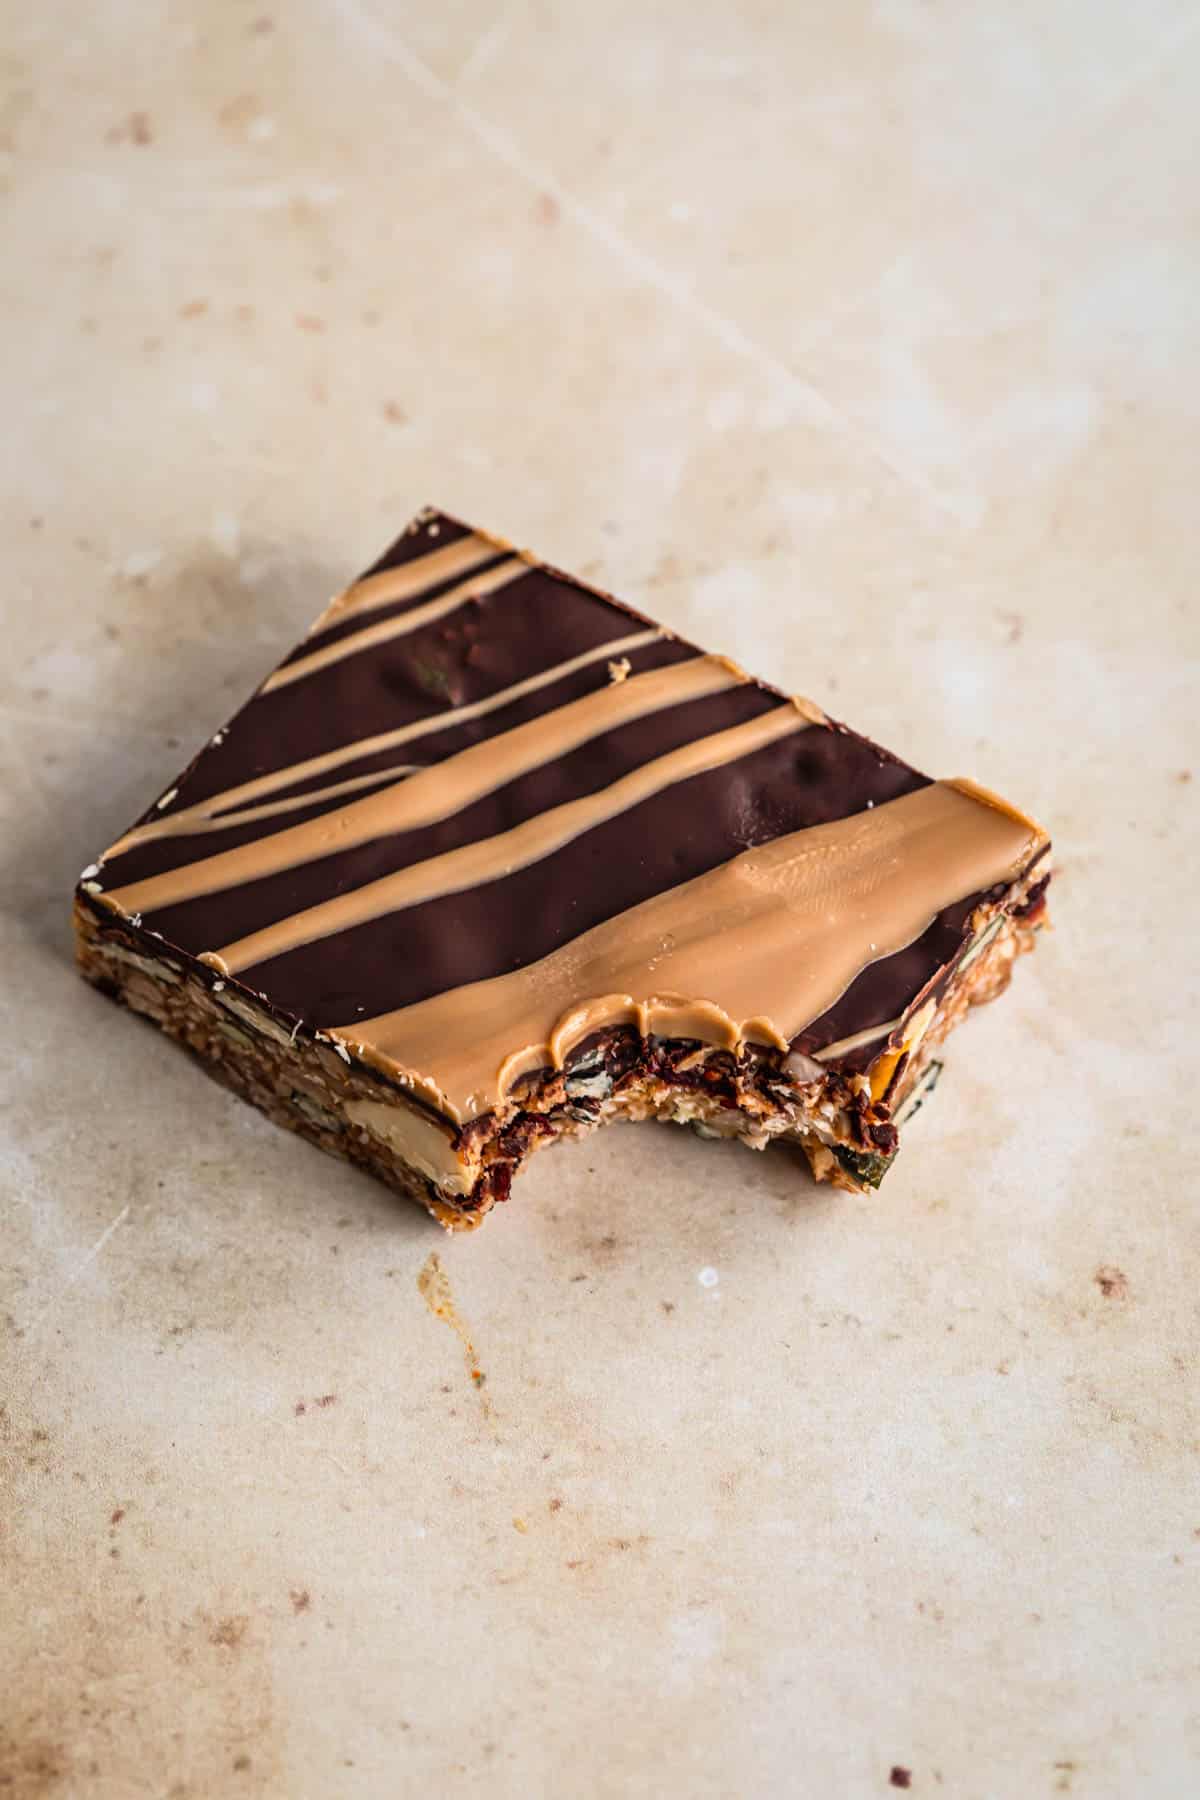 One no bake energy bar on a caramel marble backdrop, the bar has one bite taken out of it.